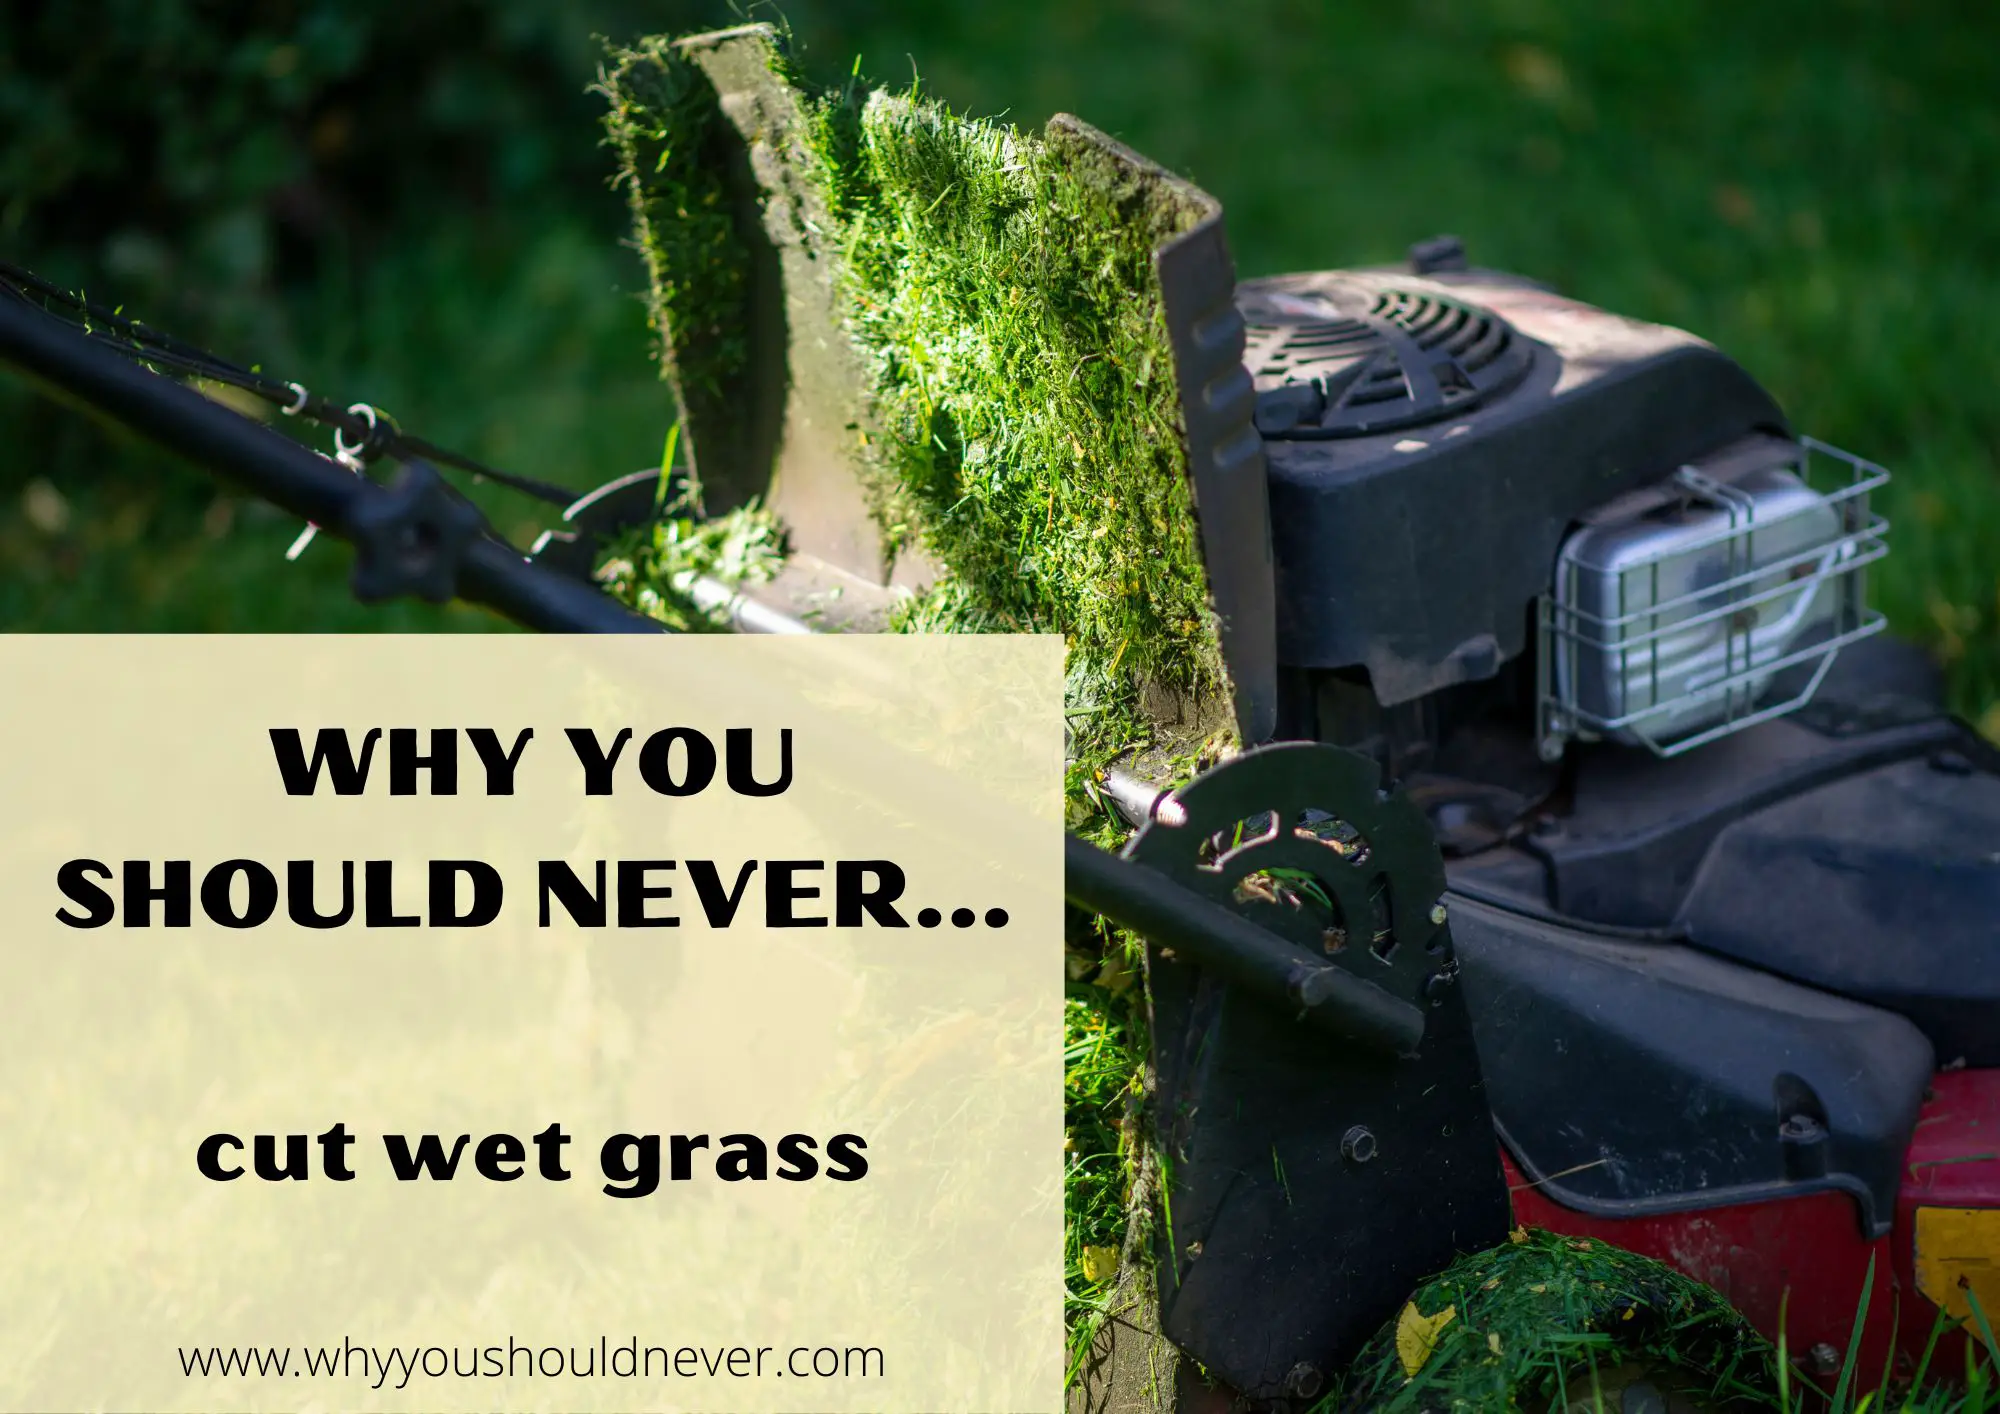 Why You Should Never Cut Wet Grass